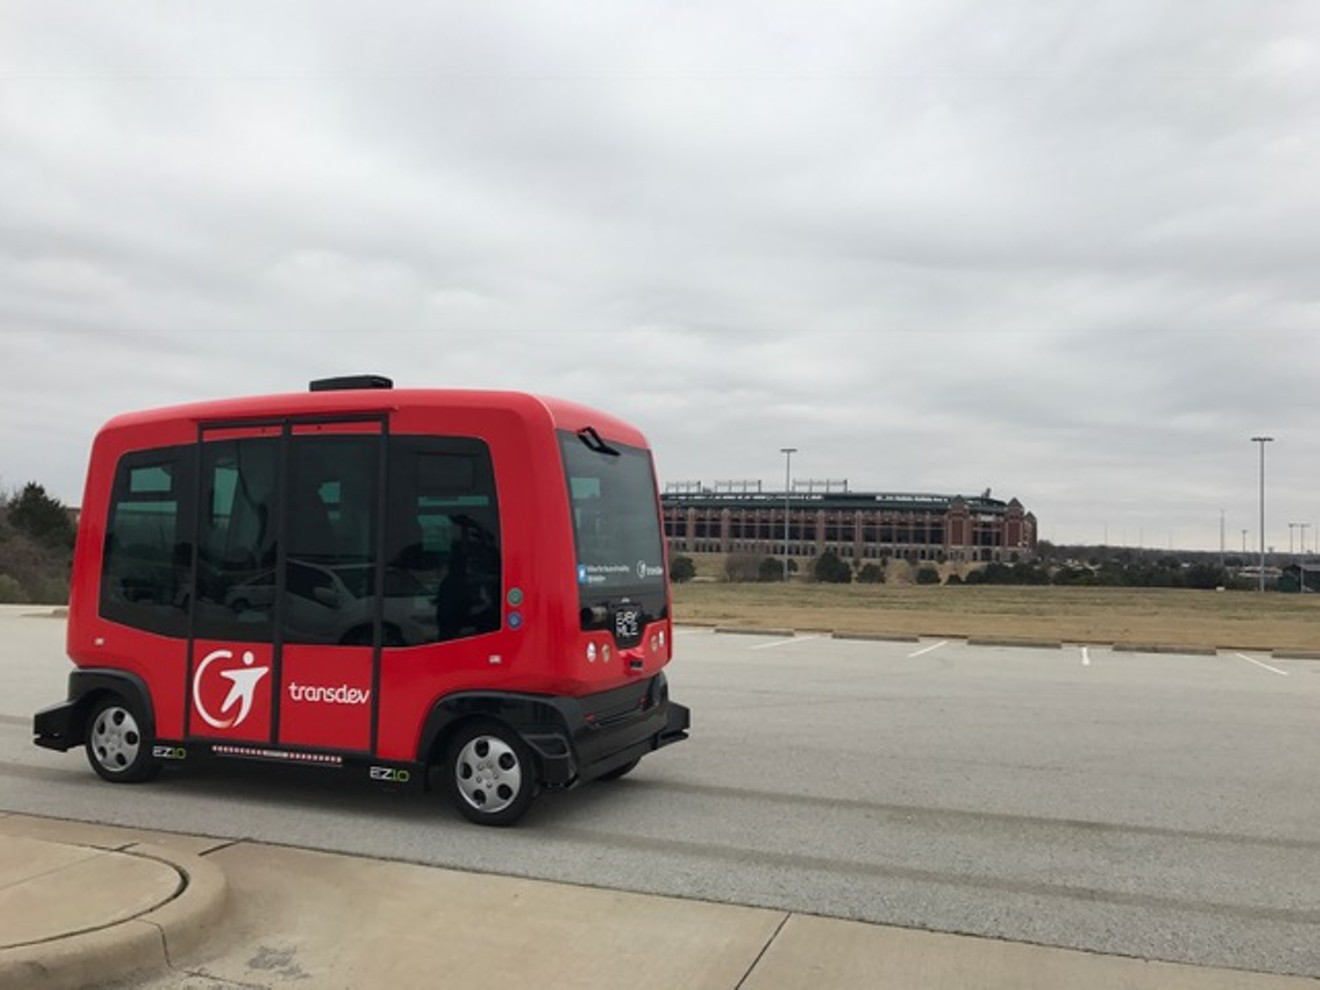 Arlington is among the first stops on a cross-country tour promoting the EasyMile EZ10, a driverless shuttle that can reach speeds of up to 35 mph.